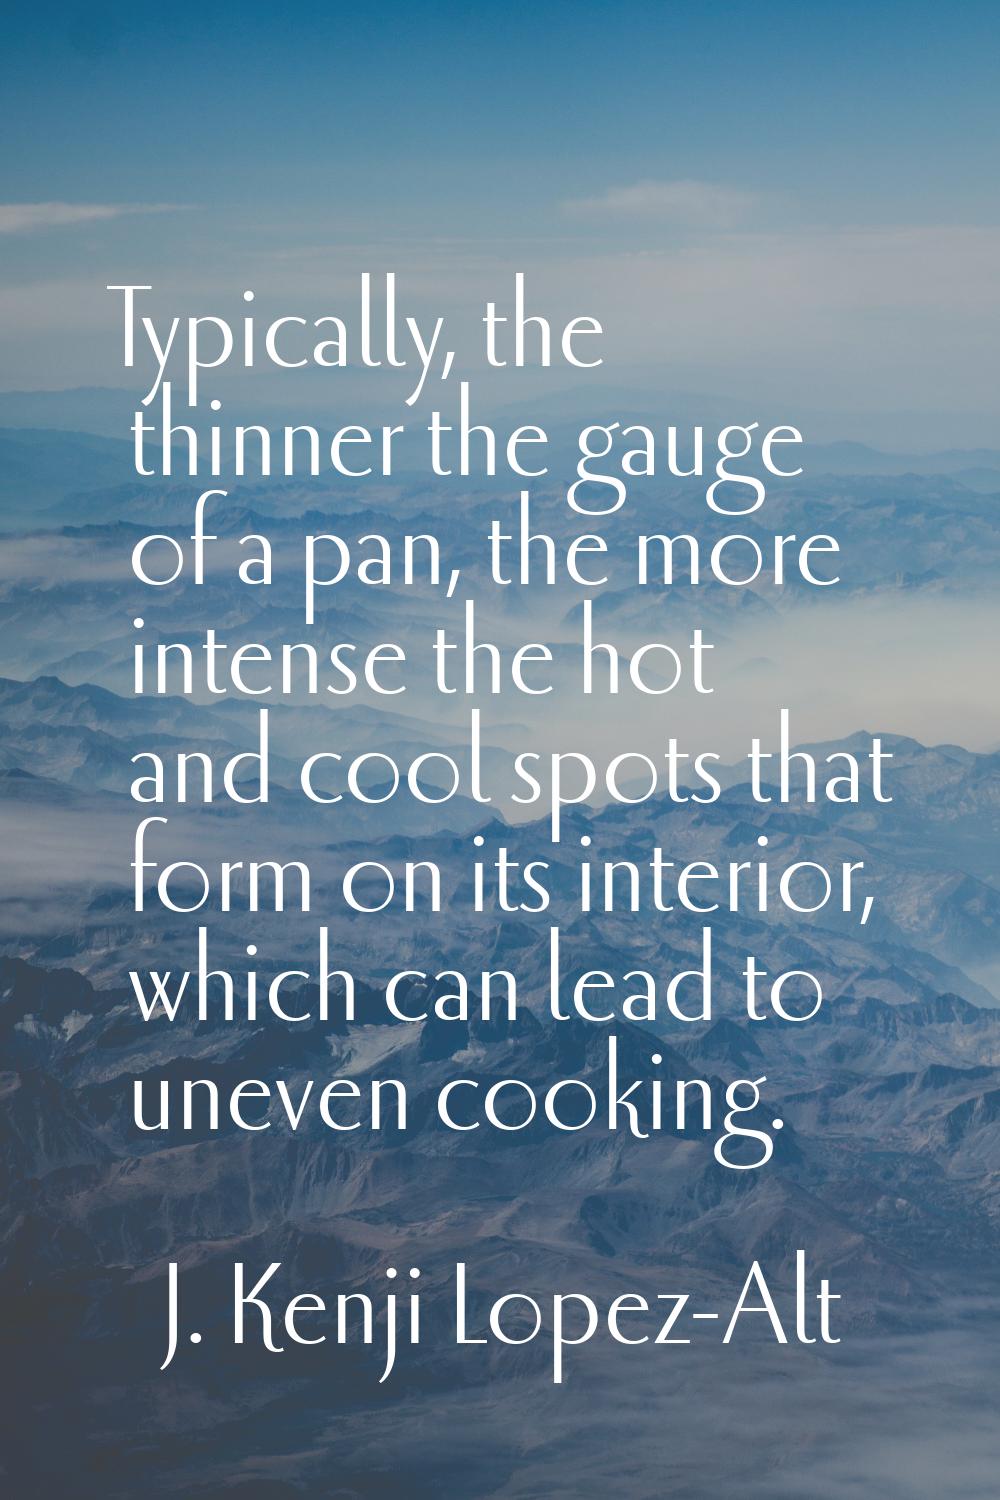 Typically, the thinner the gauge of a pan, the more intense the hot and cool spots that form on its